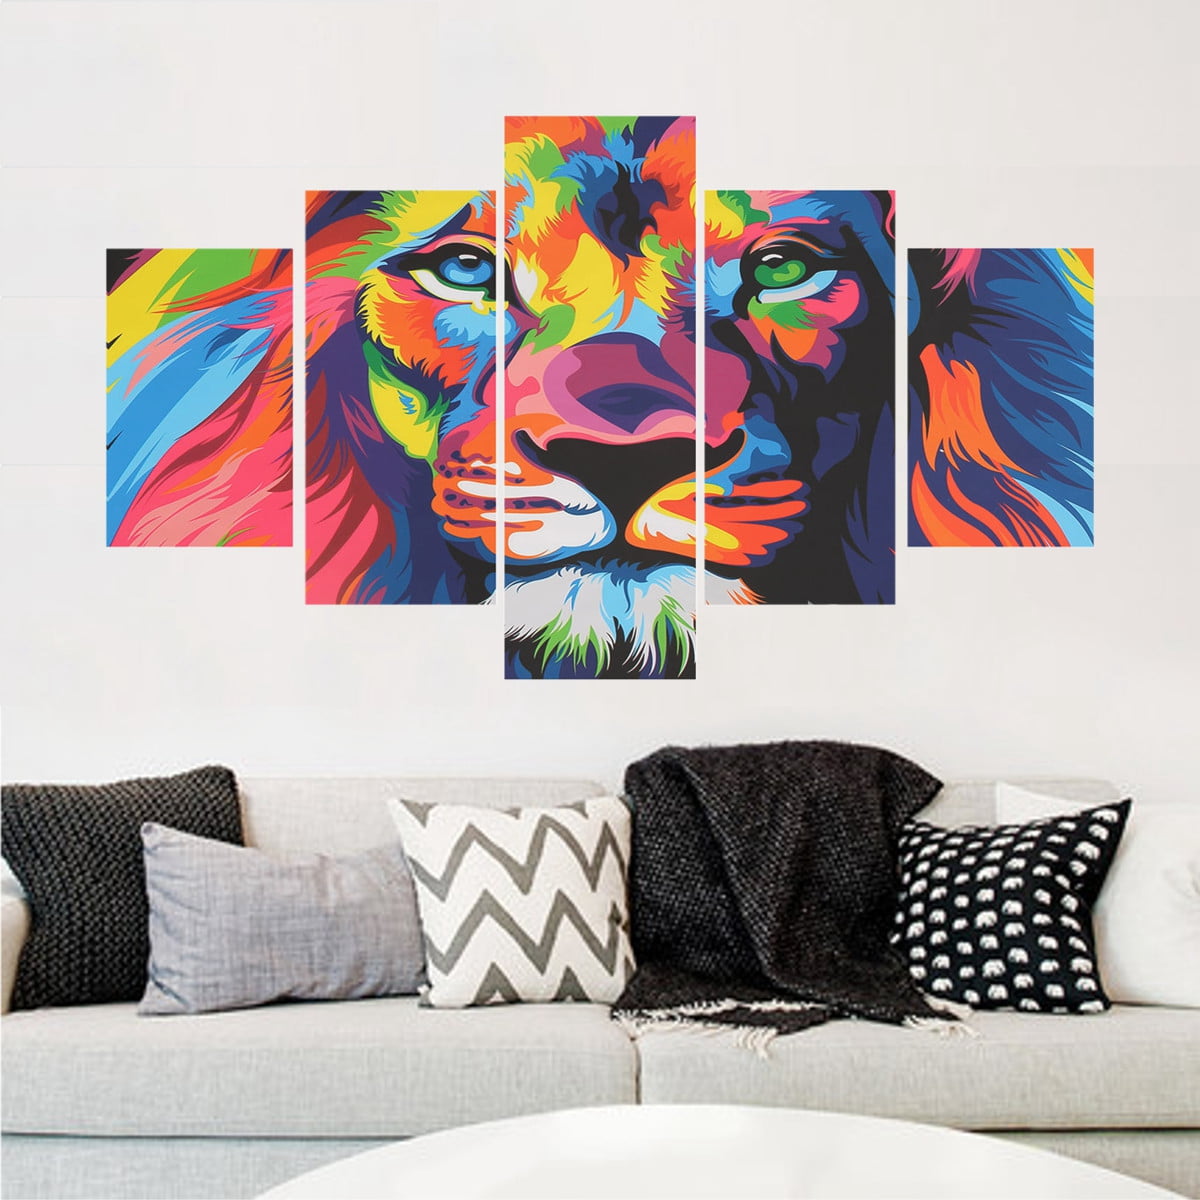 Over the Bed Wall Decor Modern Bedroom Wall Art Bedroom Canvas Wall Art Canvas Art Set of 2 Lion Art Print Animal Wall Art Canvas Print